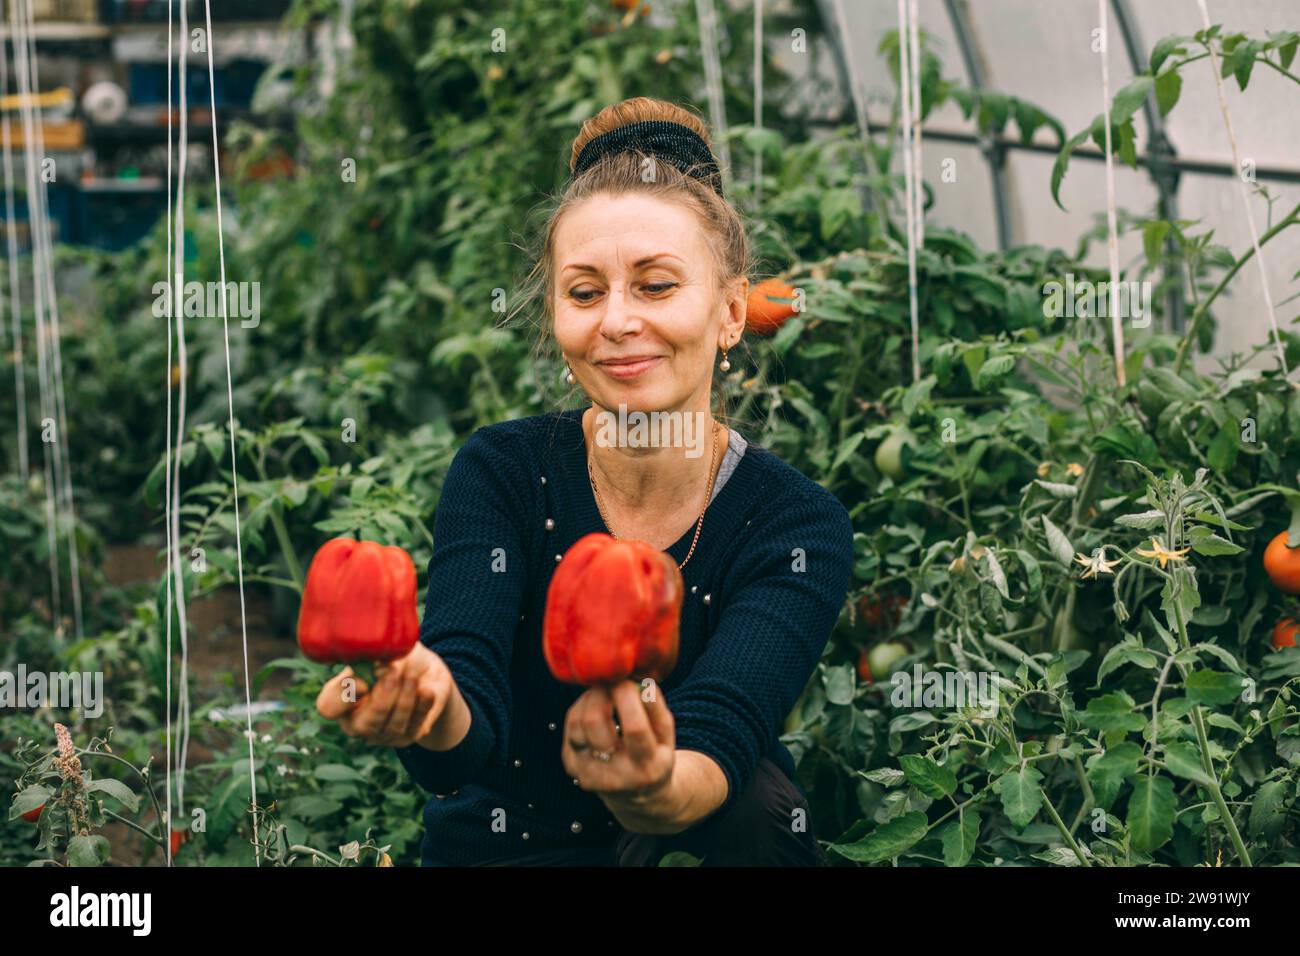 Smiling woman holding red bell peppers in greenhouse Stock Photo